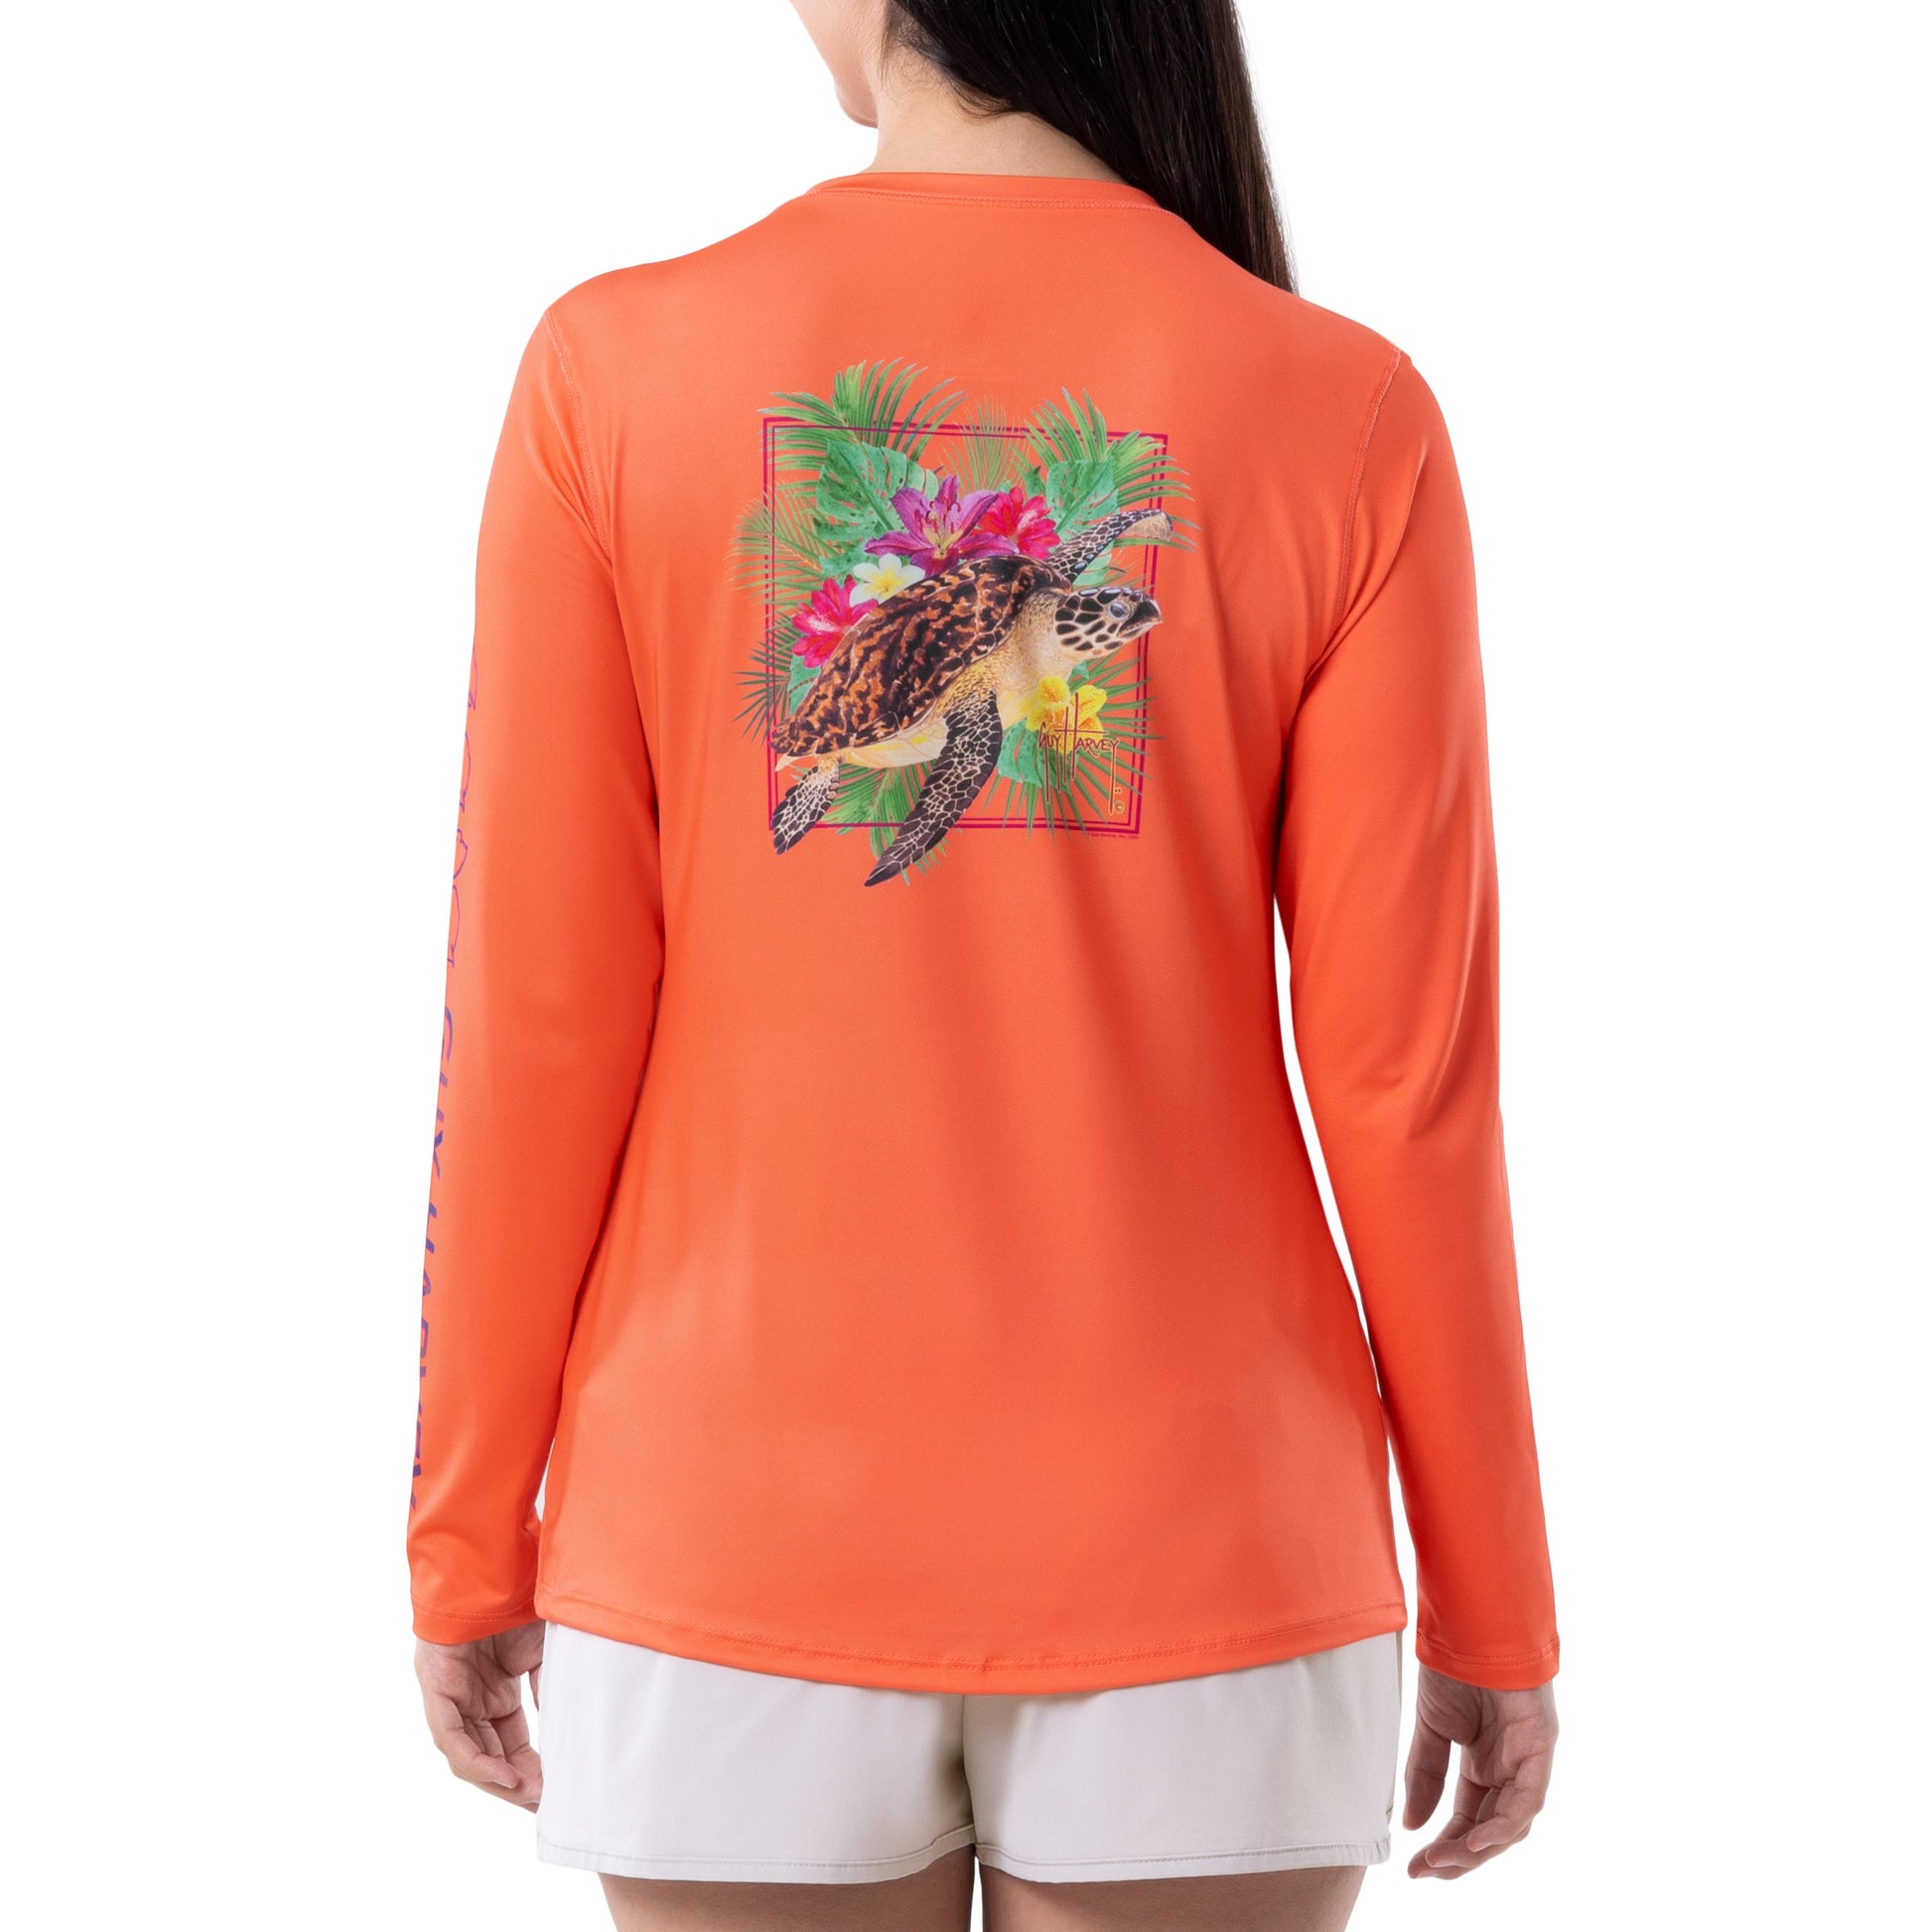 Ladies Burst of Florals Long Sleeve Sun Protection Shirt View 1